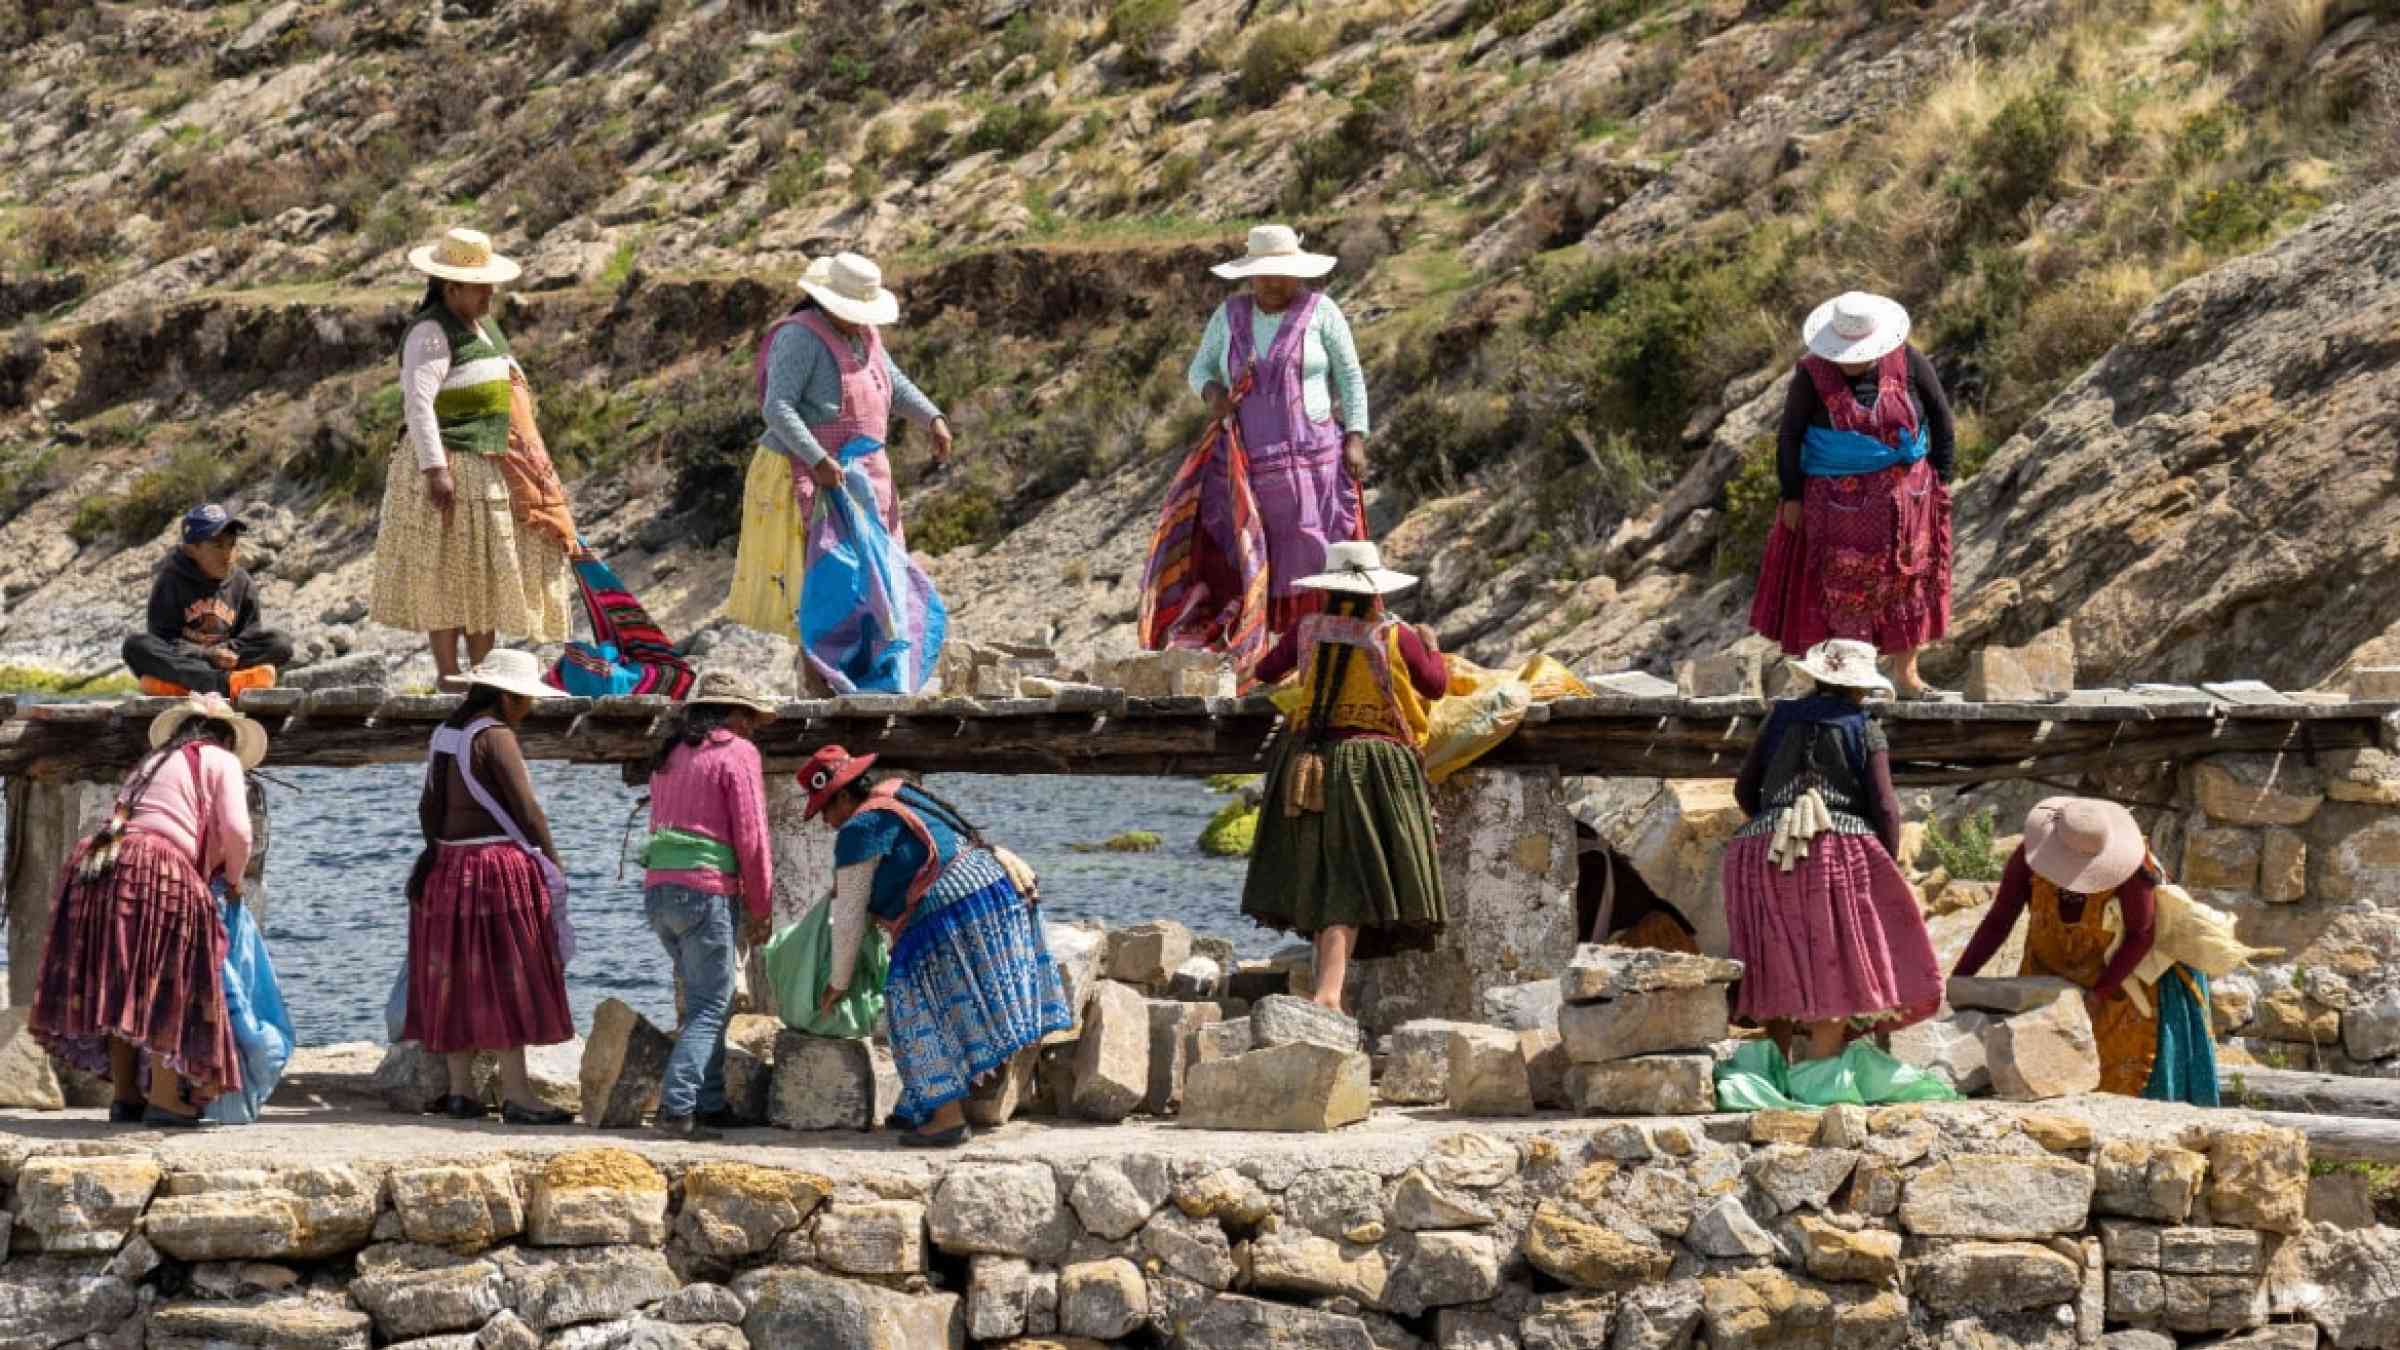 Women in Bolivia reconstruct the Temple on Isla del Sol using all hand tools